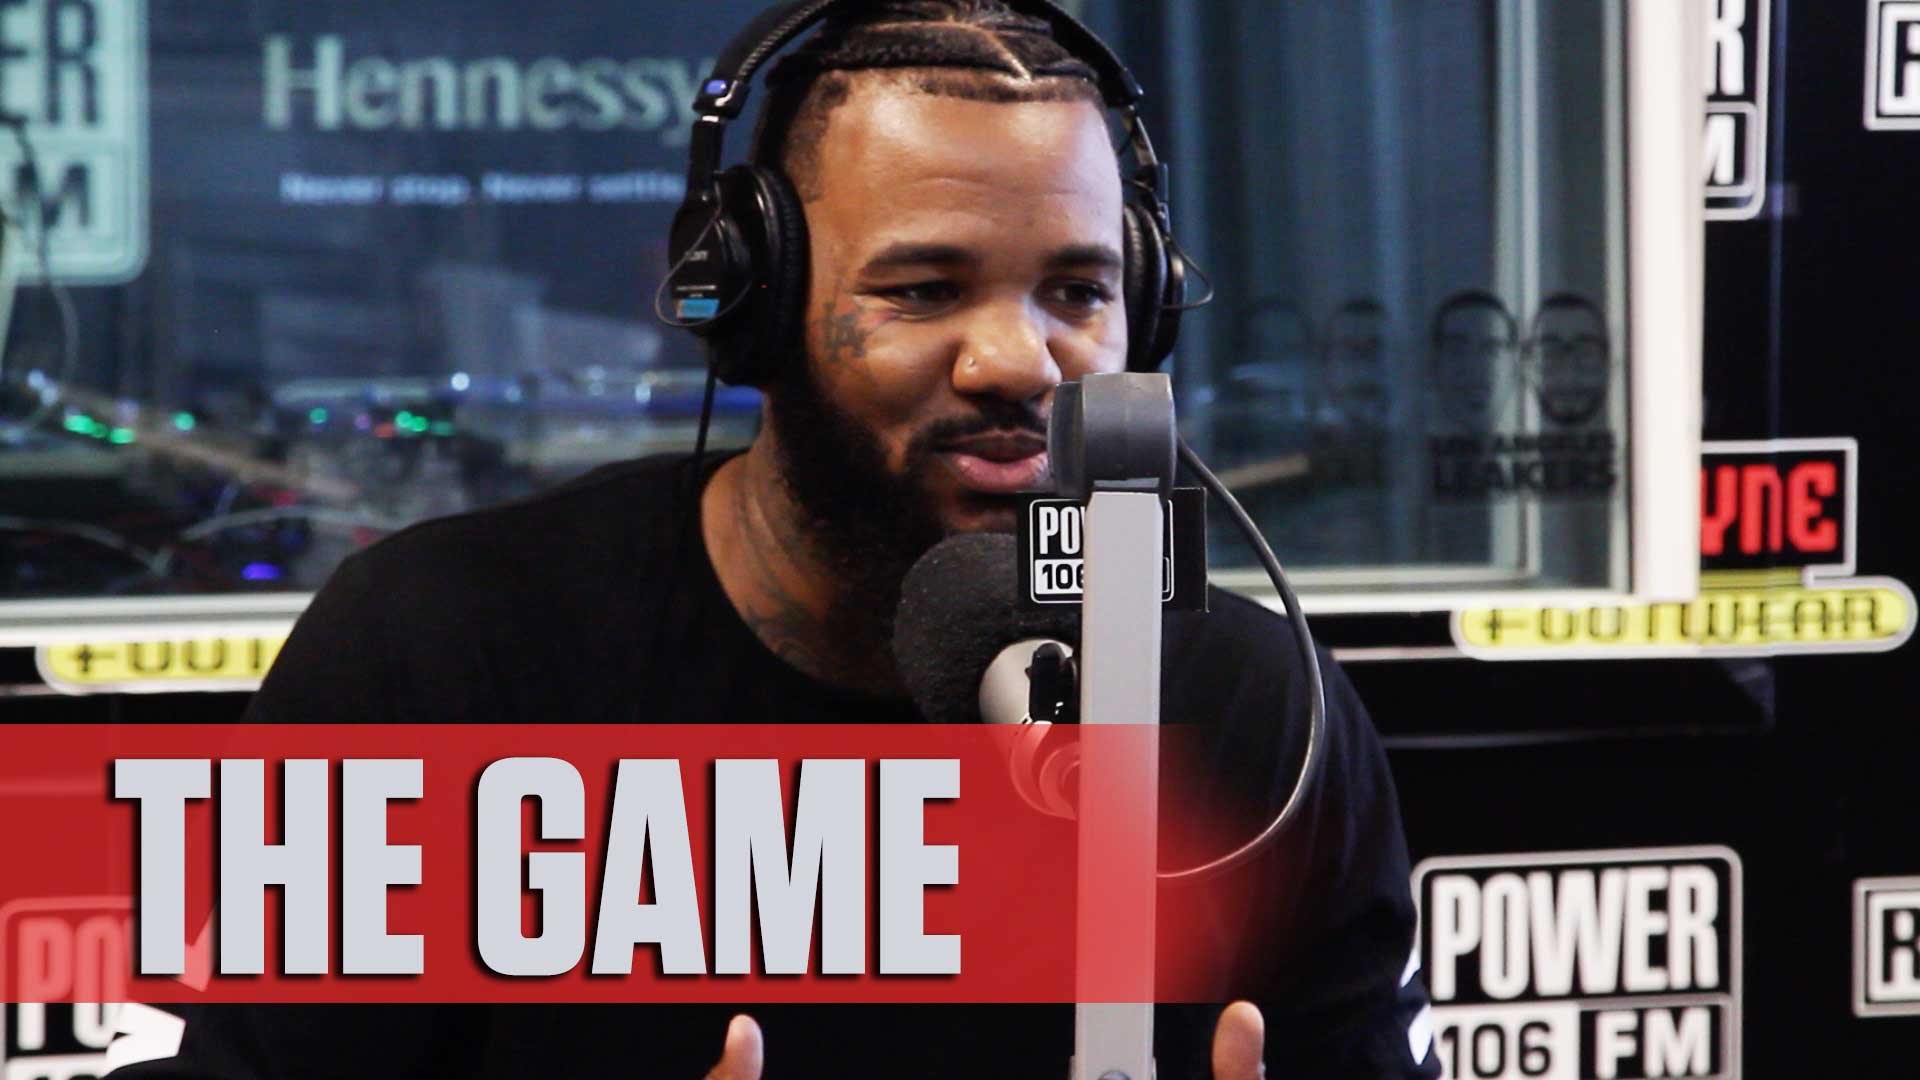 The Game Shares A Powerful Spoken Word Poem On Race In America [VIDEO]